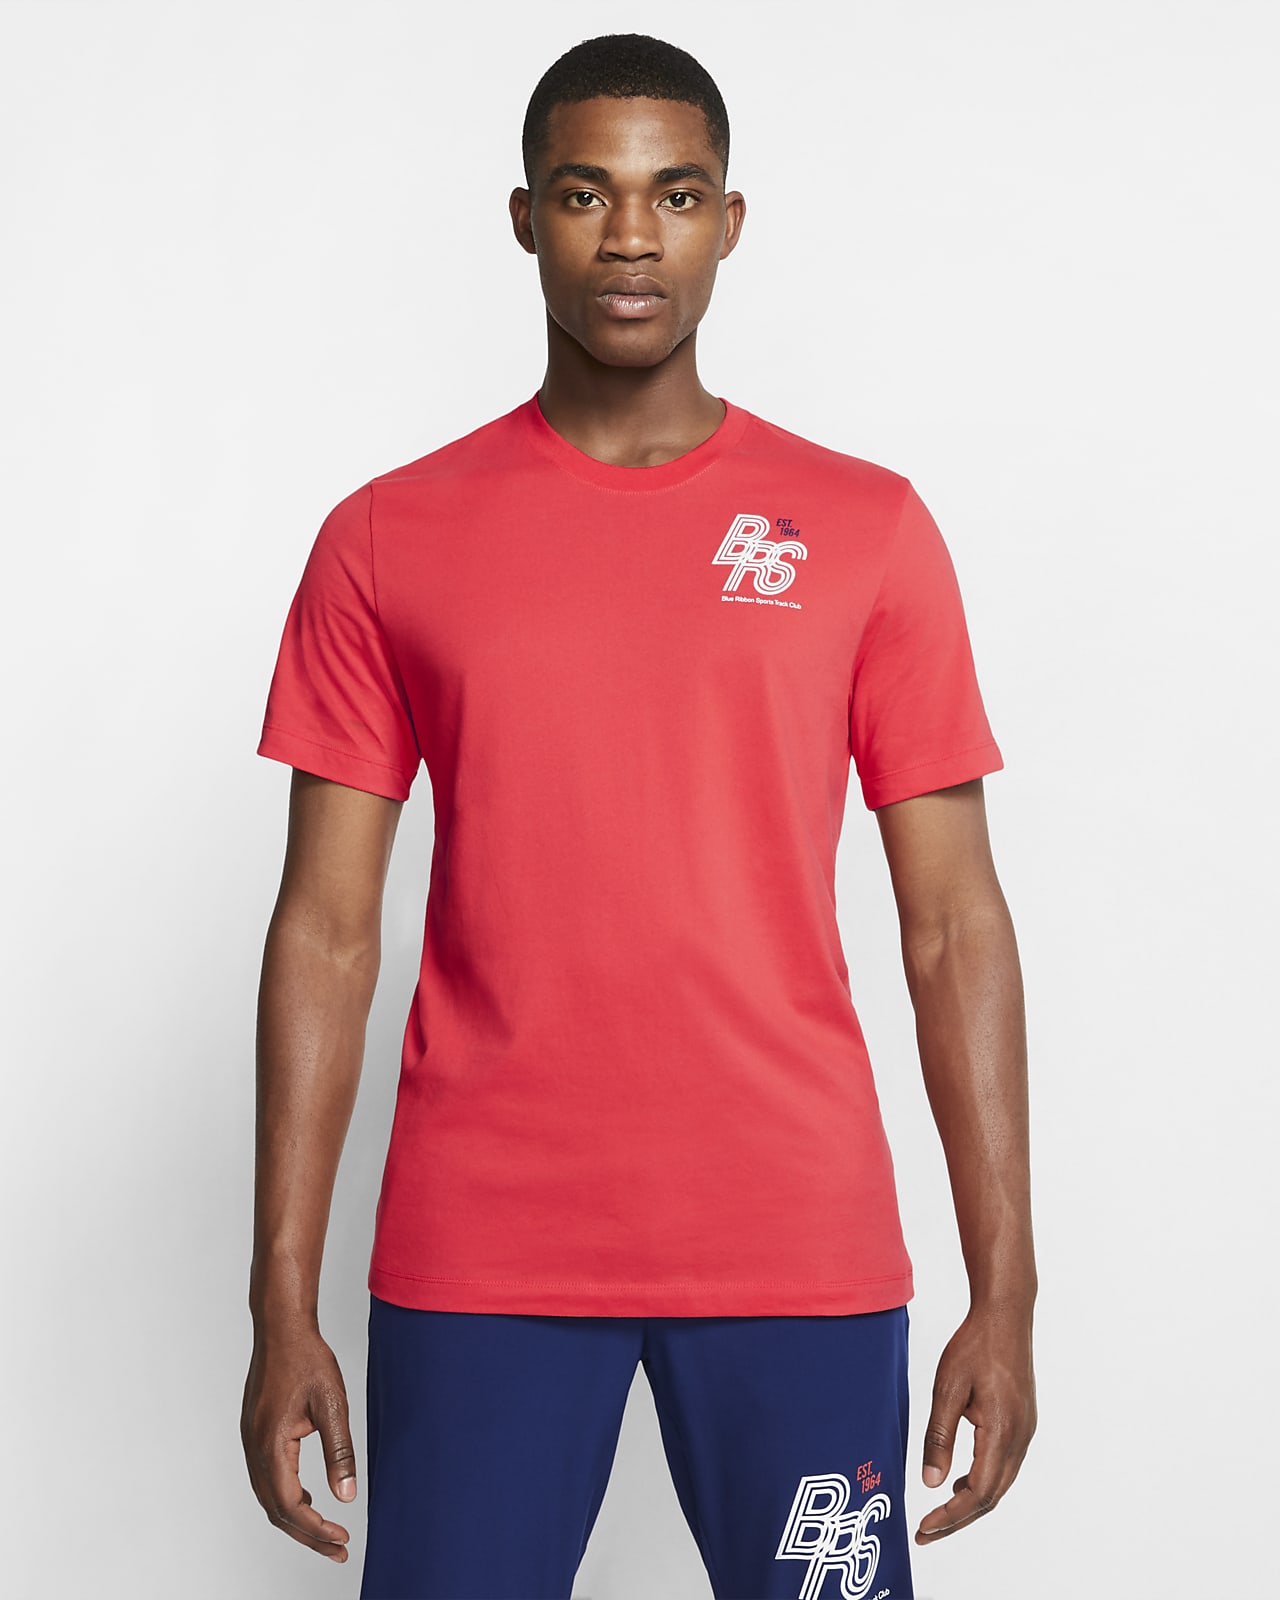 red sports t shirt